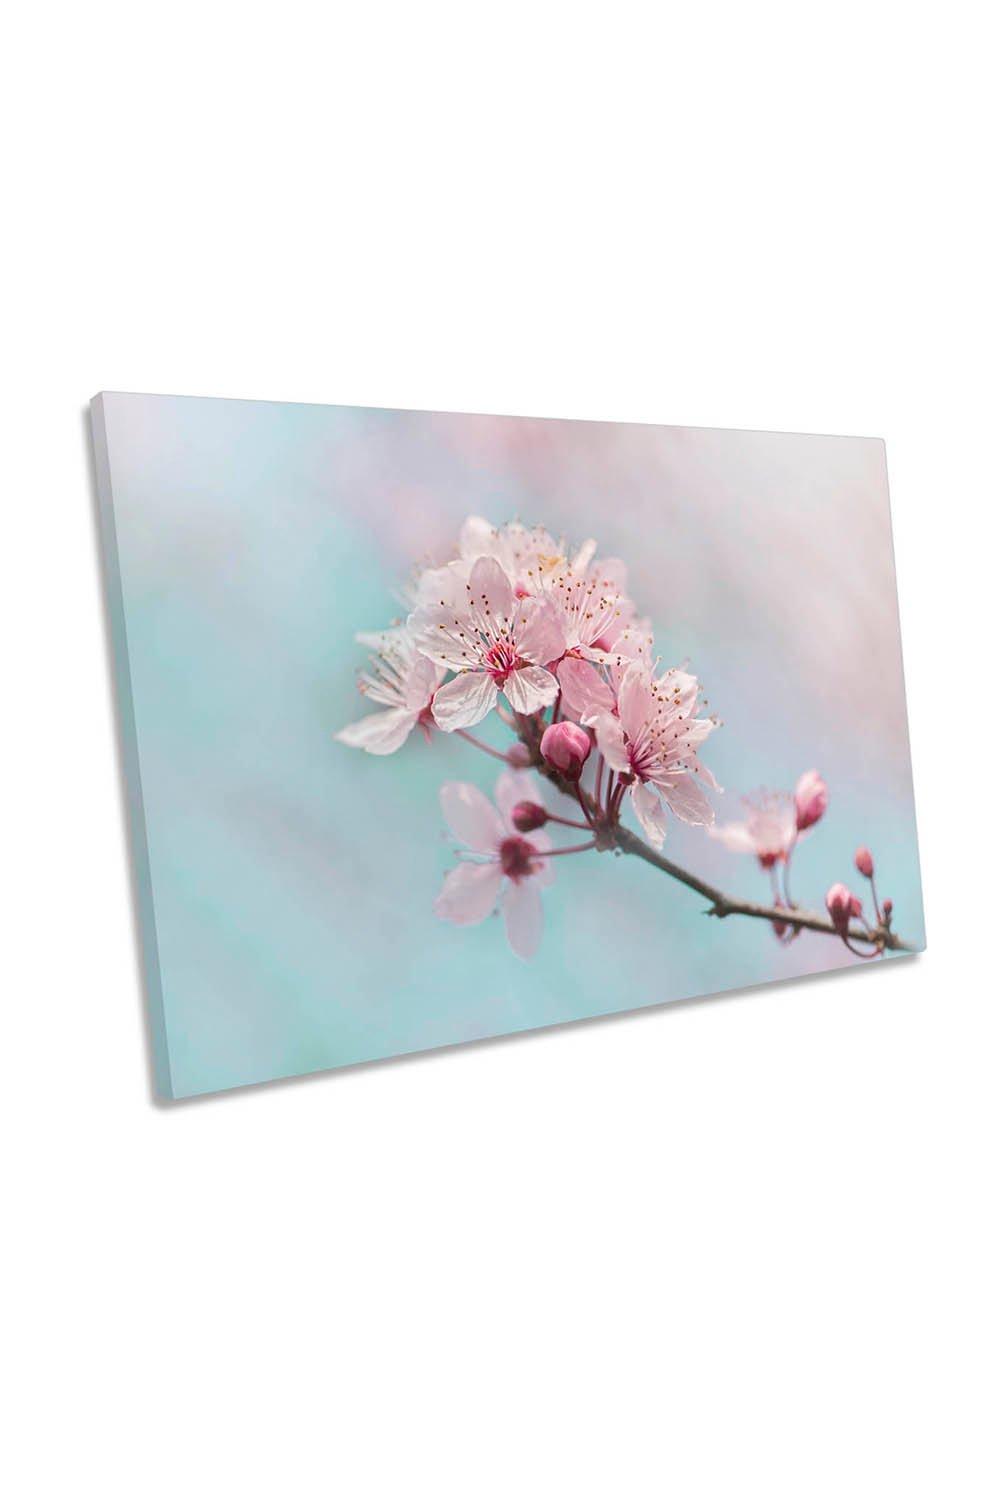 Fresh Cherry Pink Blossom Floral Flowers Canvas Wall Art Picture Print